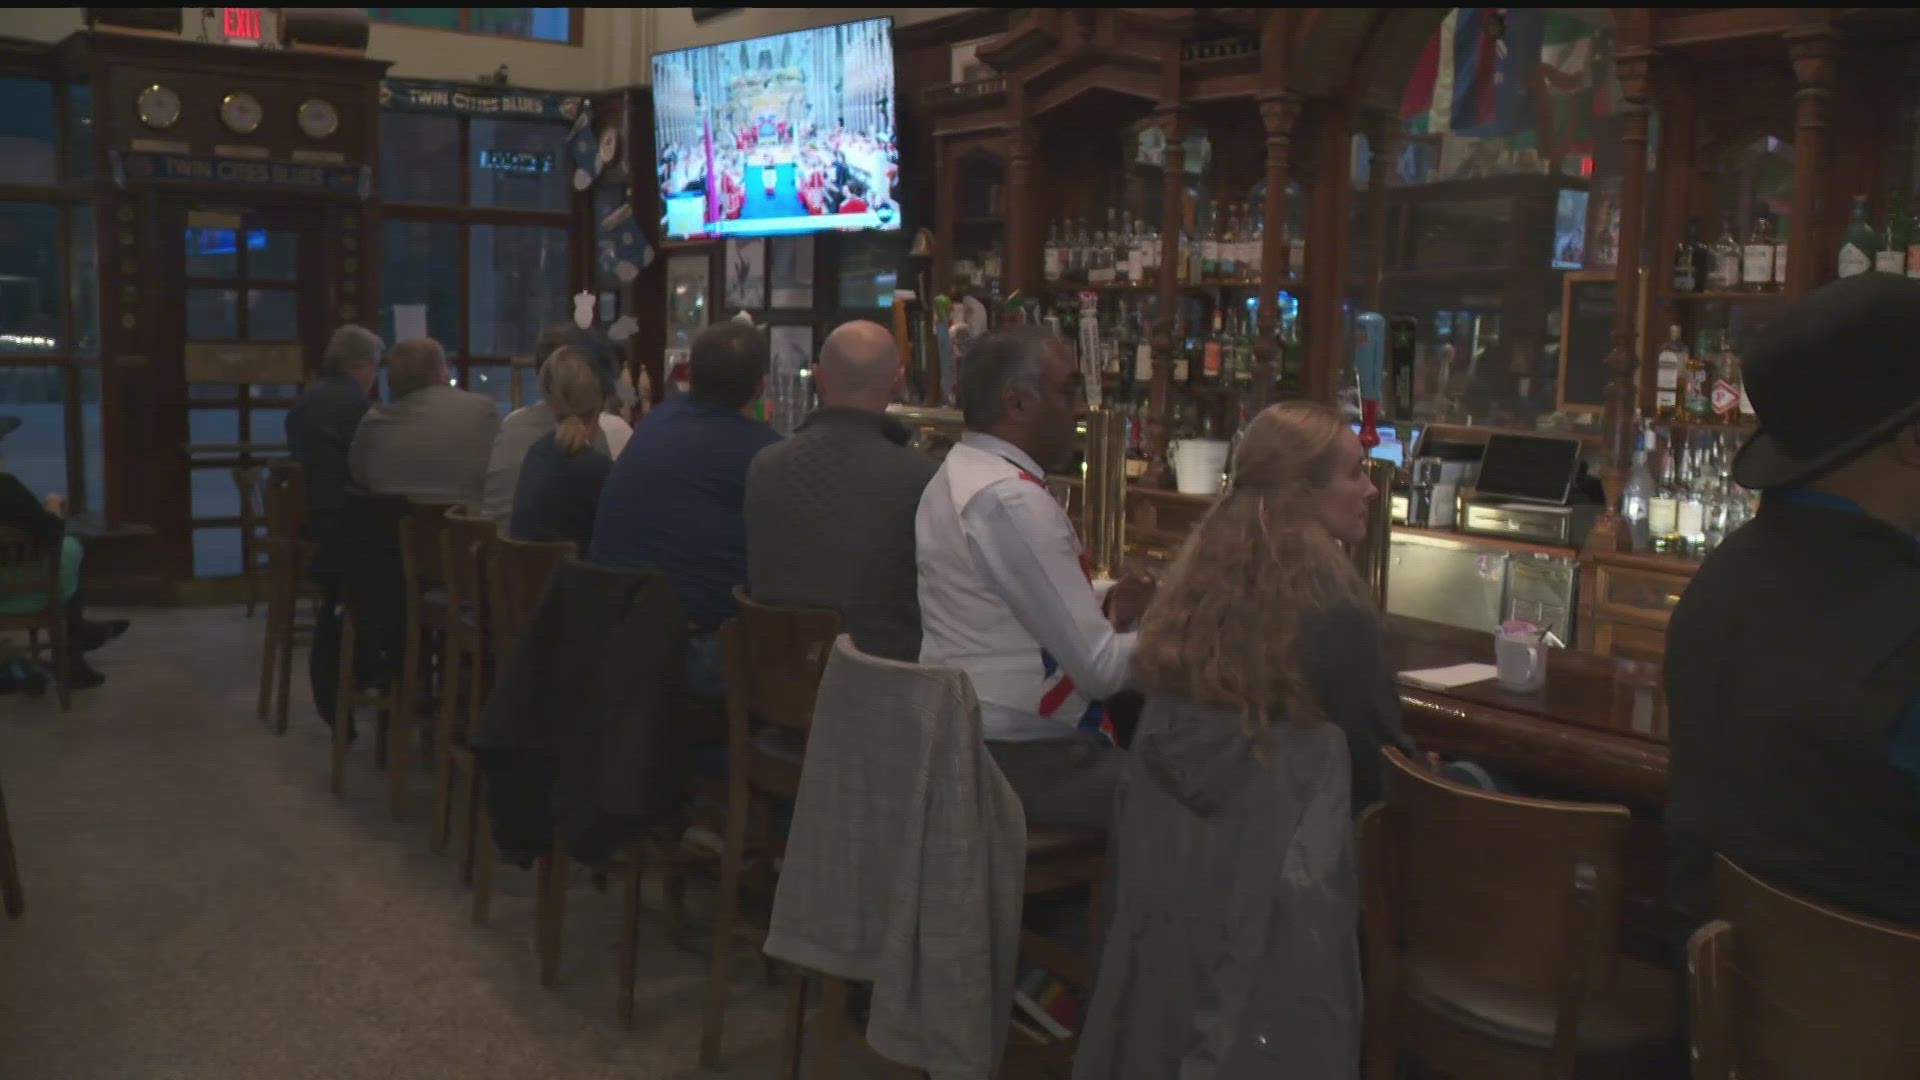 The downtown Minneapolis bar opened its doors at 4:30 a.m. sharp on Saturday.